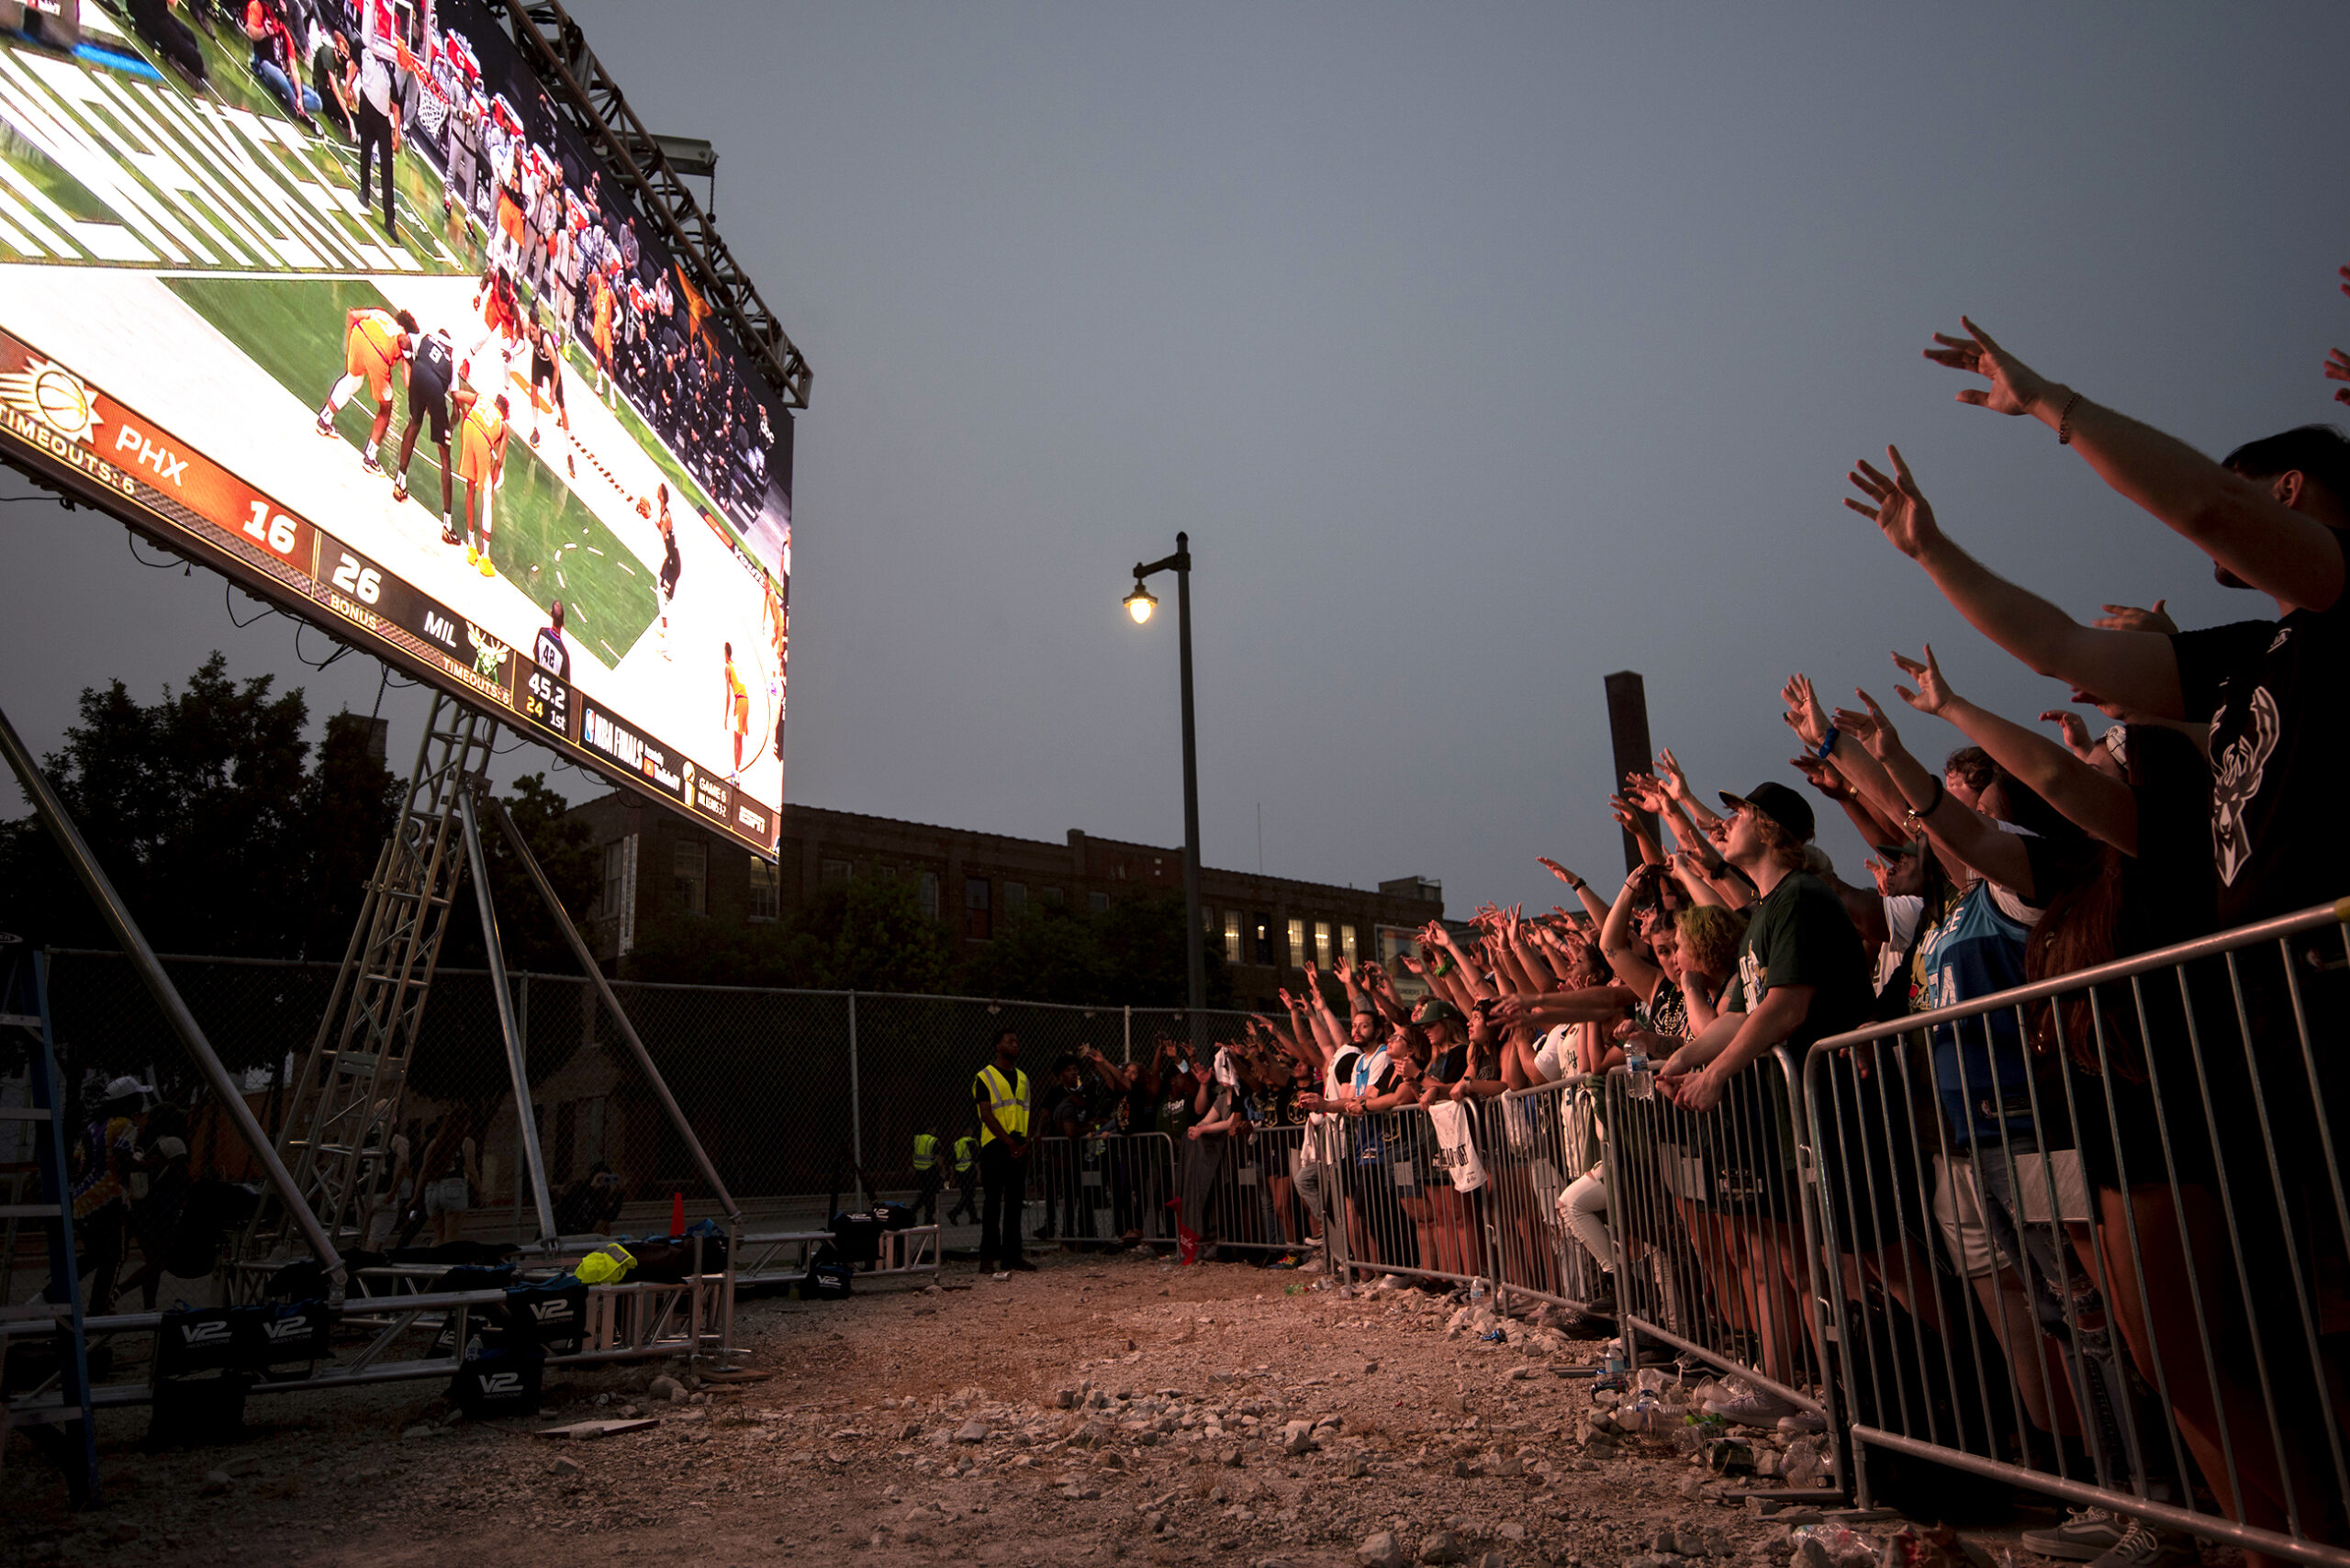 Fans raise their arms to a screen showing the game.